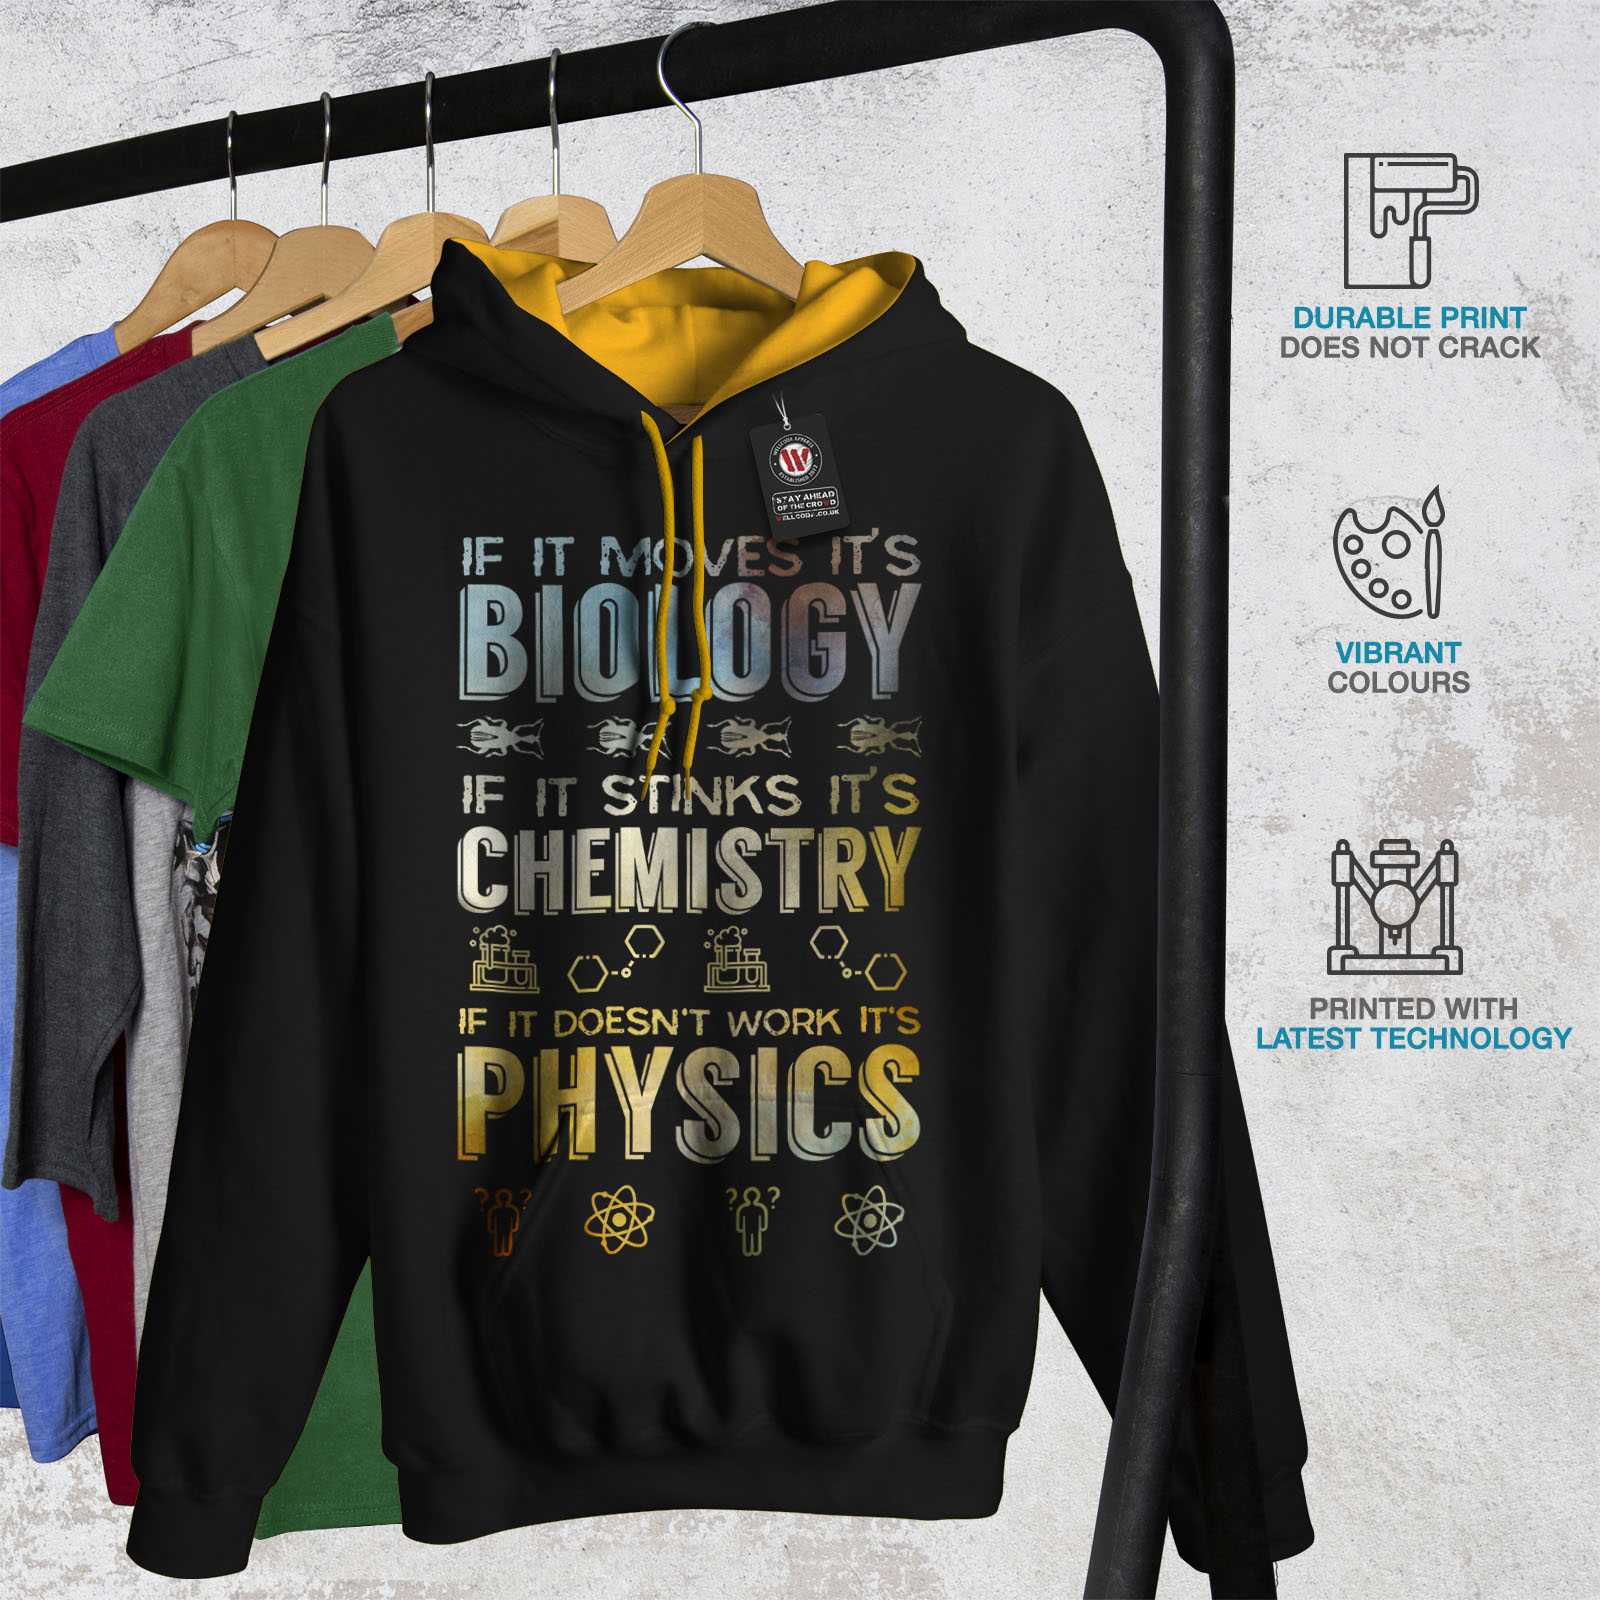 Details about  / Wellcoda Atom Science Mens Contrast Hoodie Funny Slogan Casual Jumper